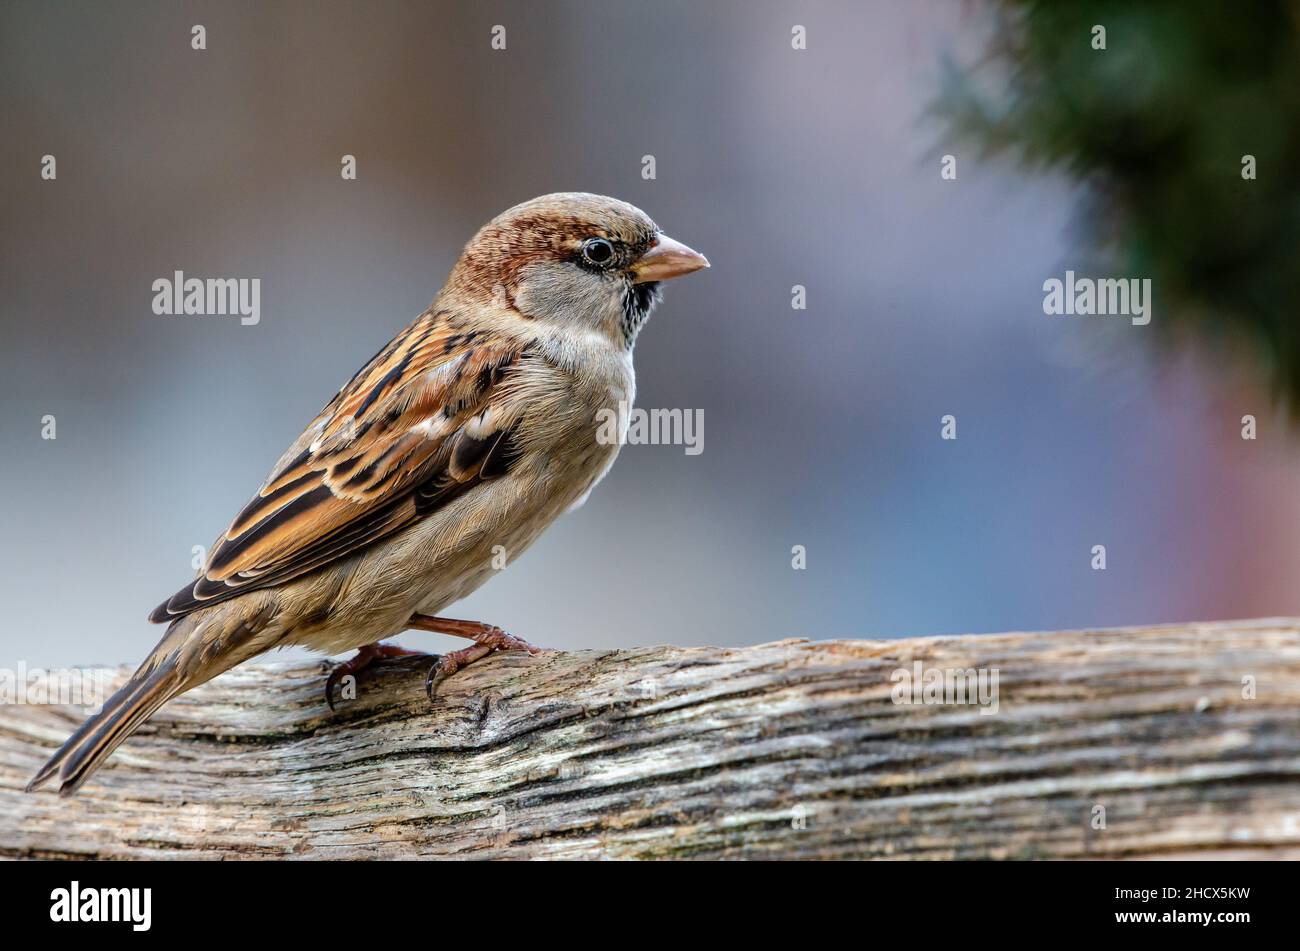 Eurasian tree sparrow (Passer montanus) sitting on wood in front of neutral background, common urban city bird portrait Stock Photo